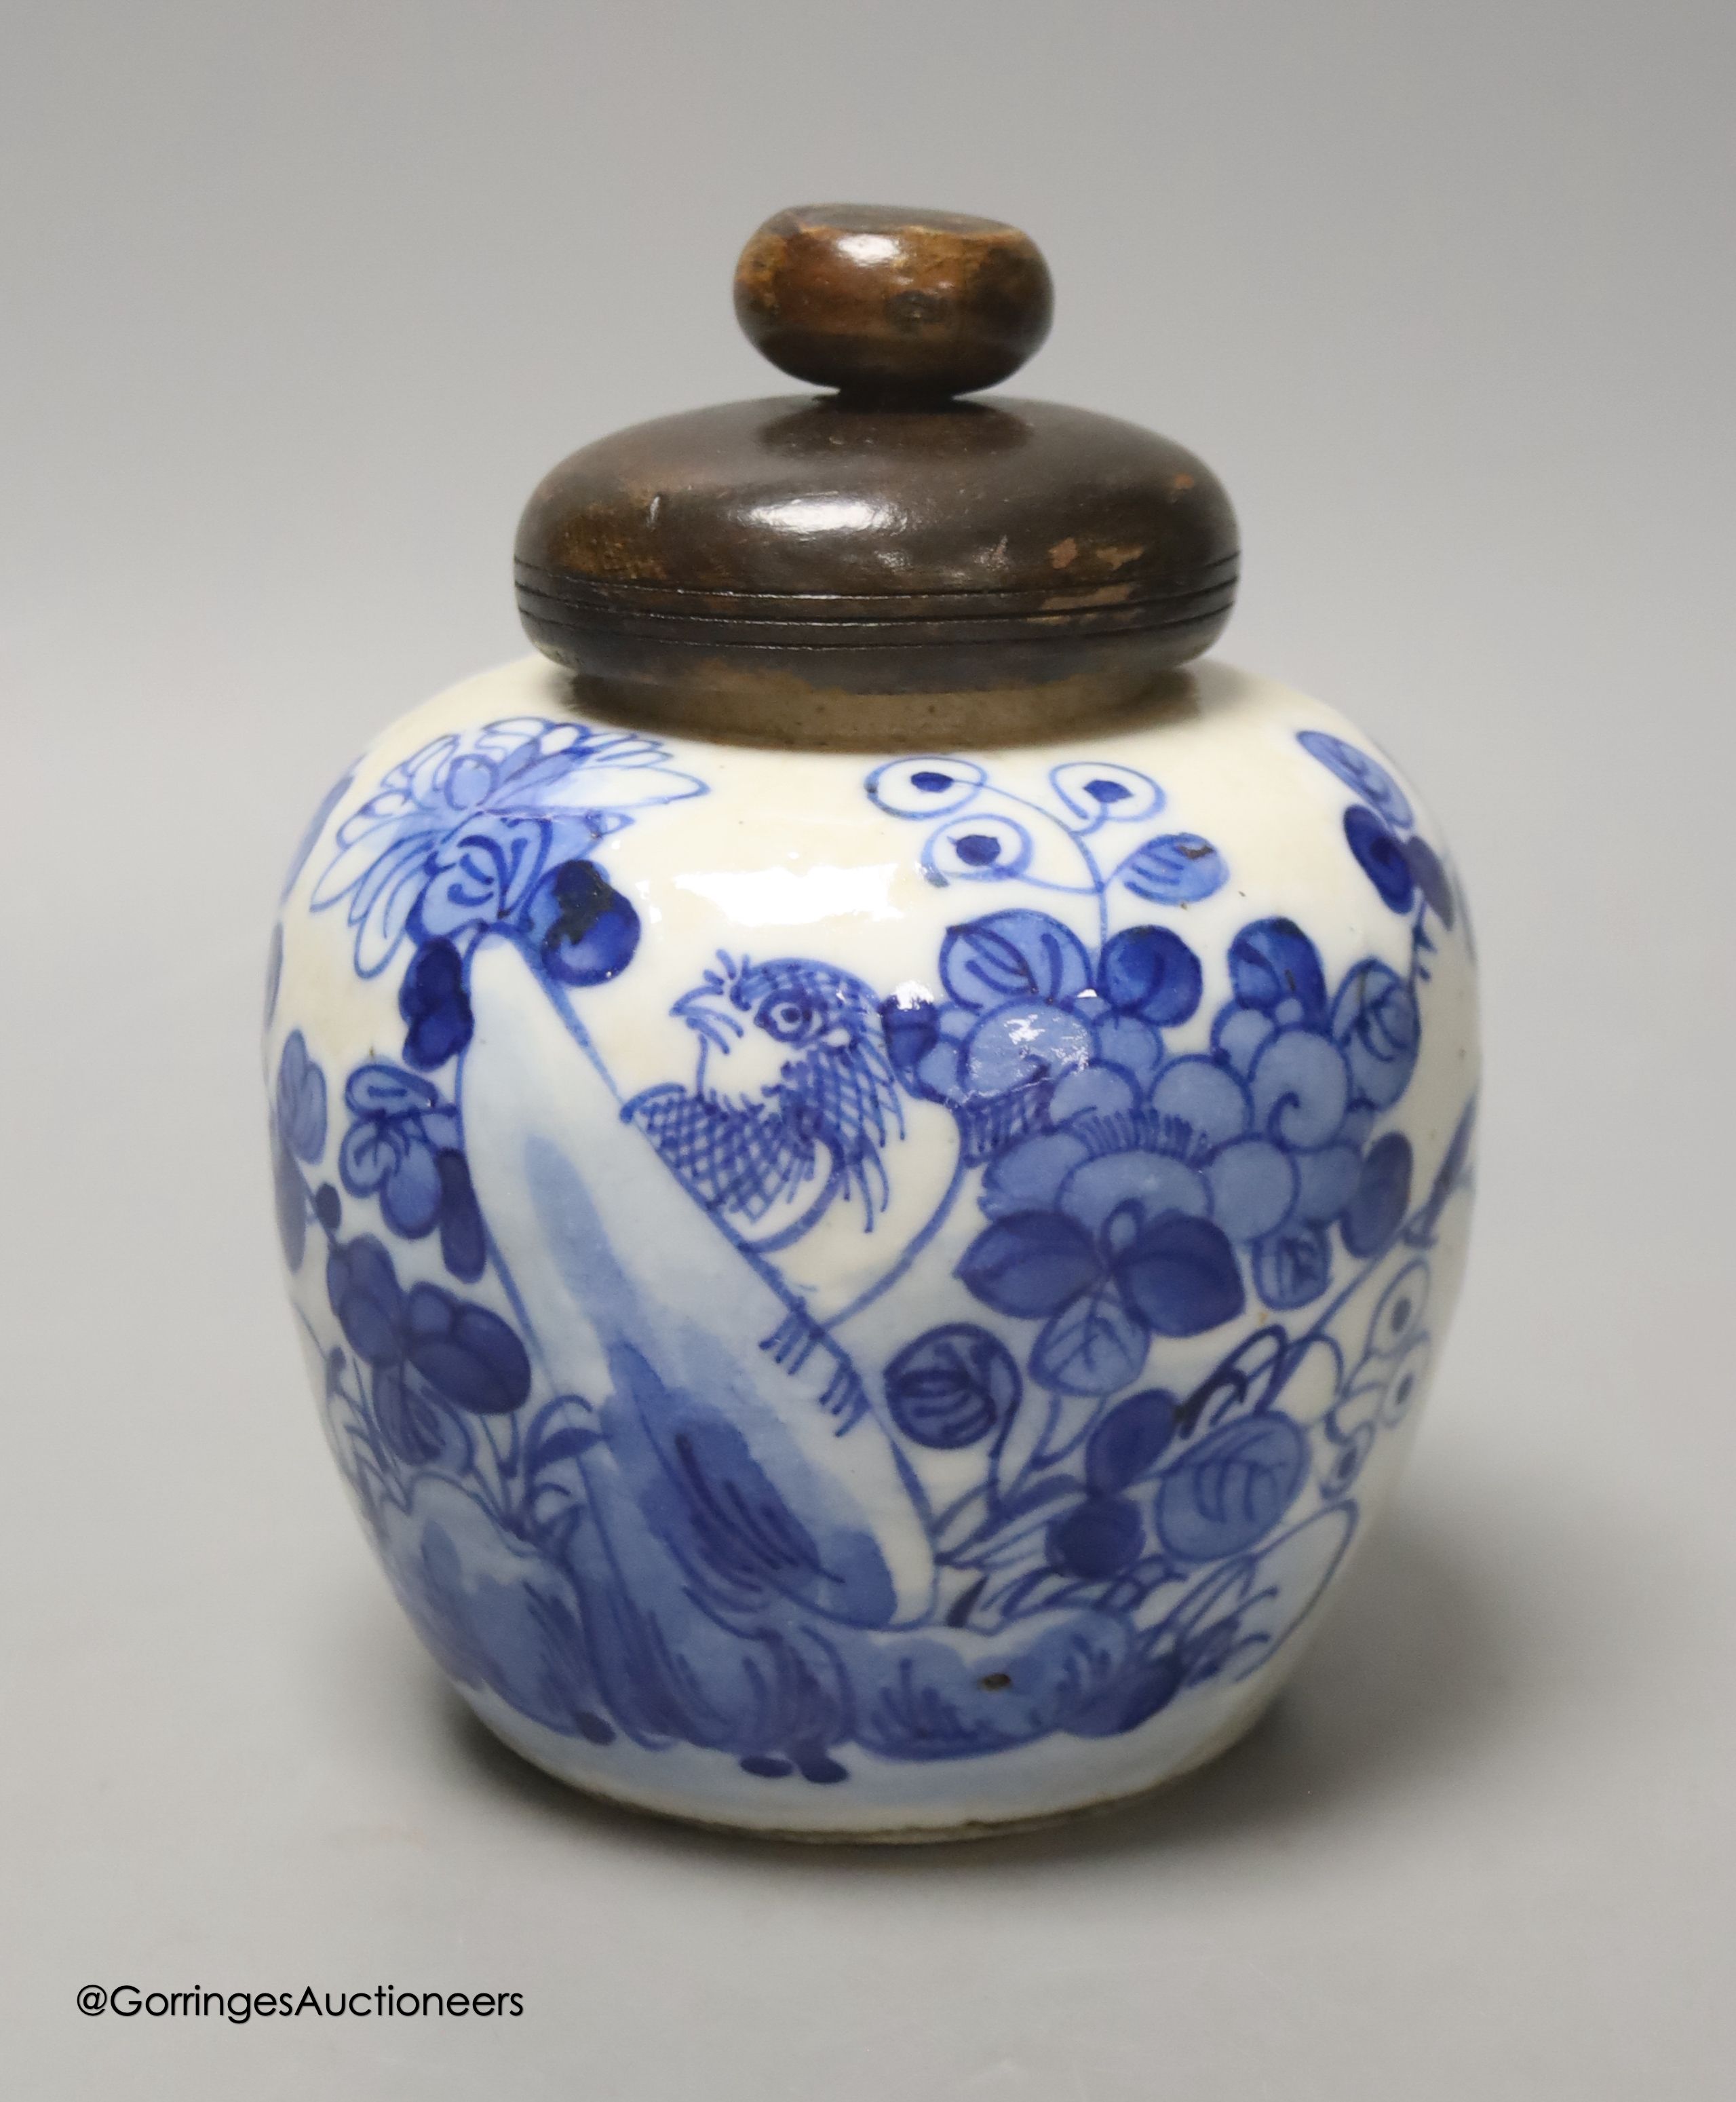 A Chinese blue and white crackle glaze jar and cover, early 20th century, height 12cm excl. cover